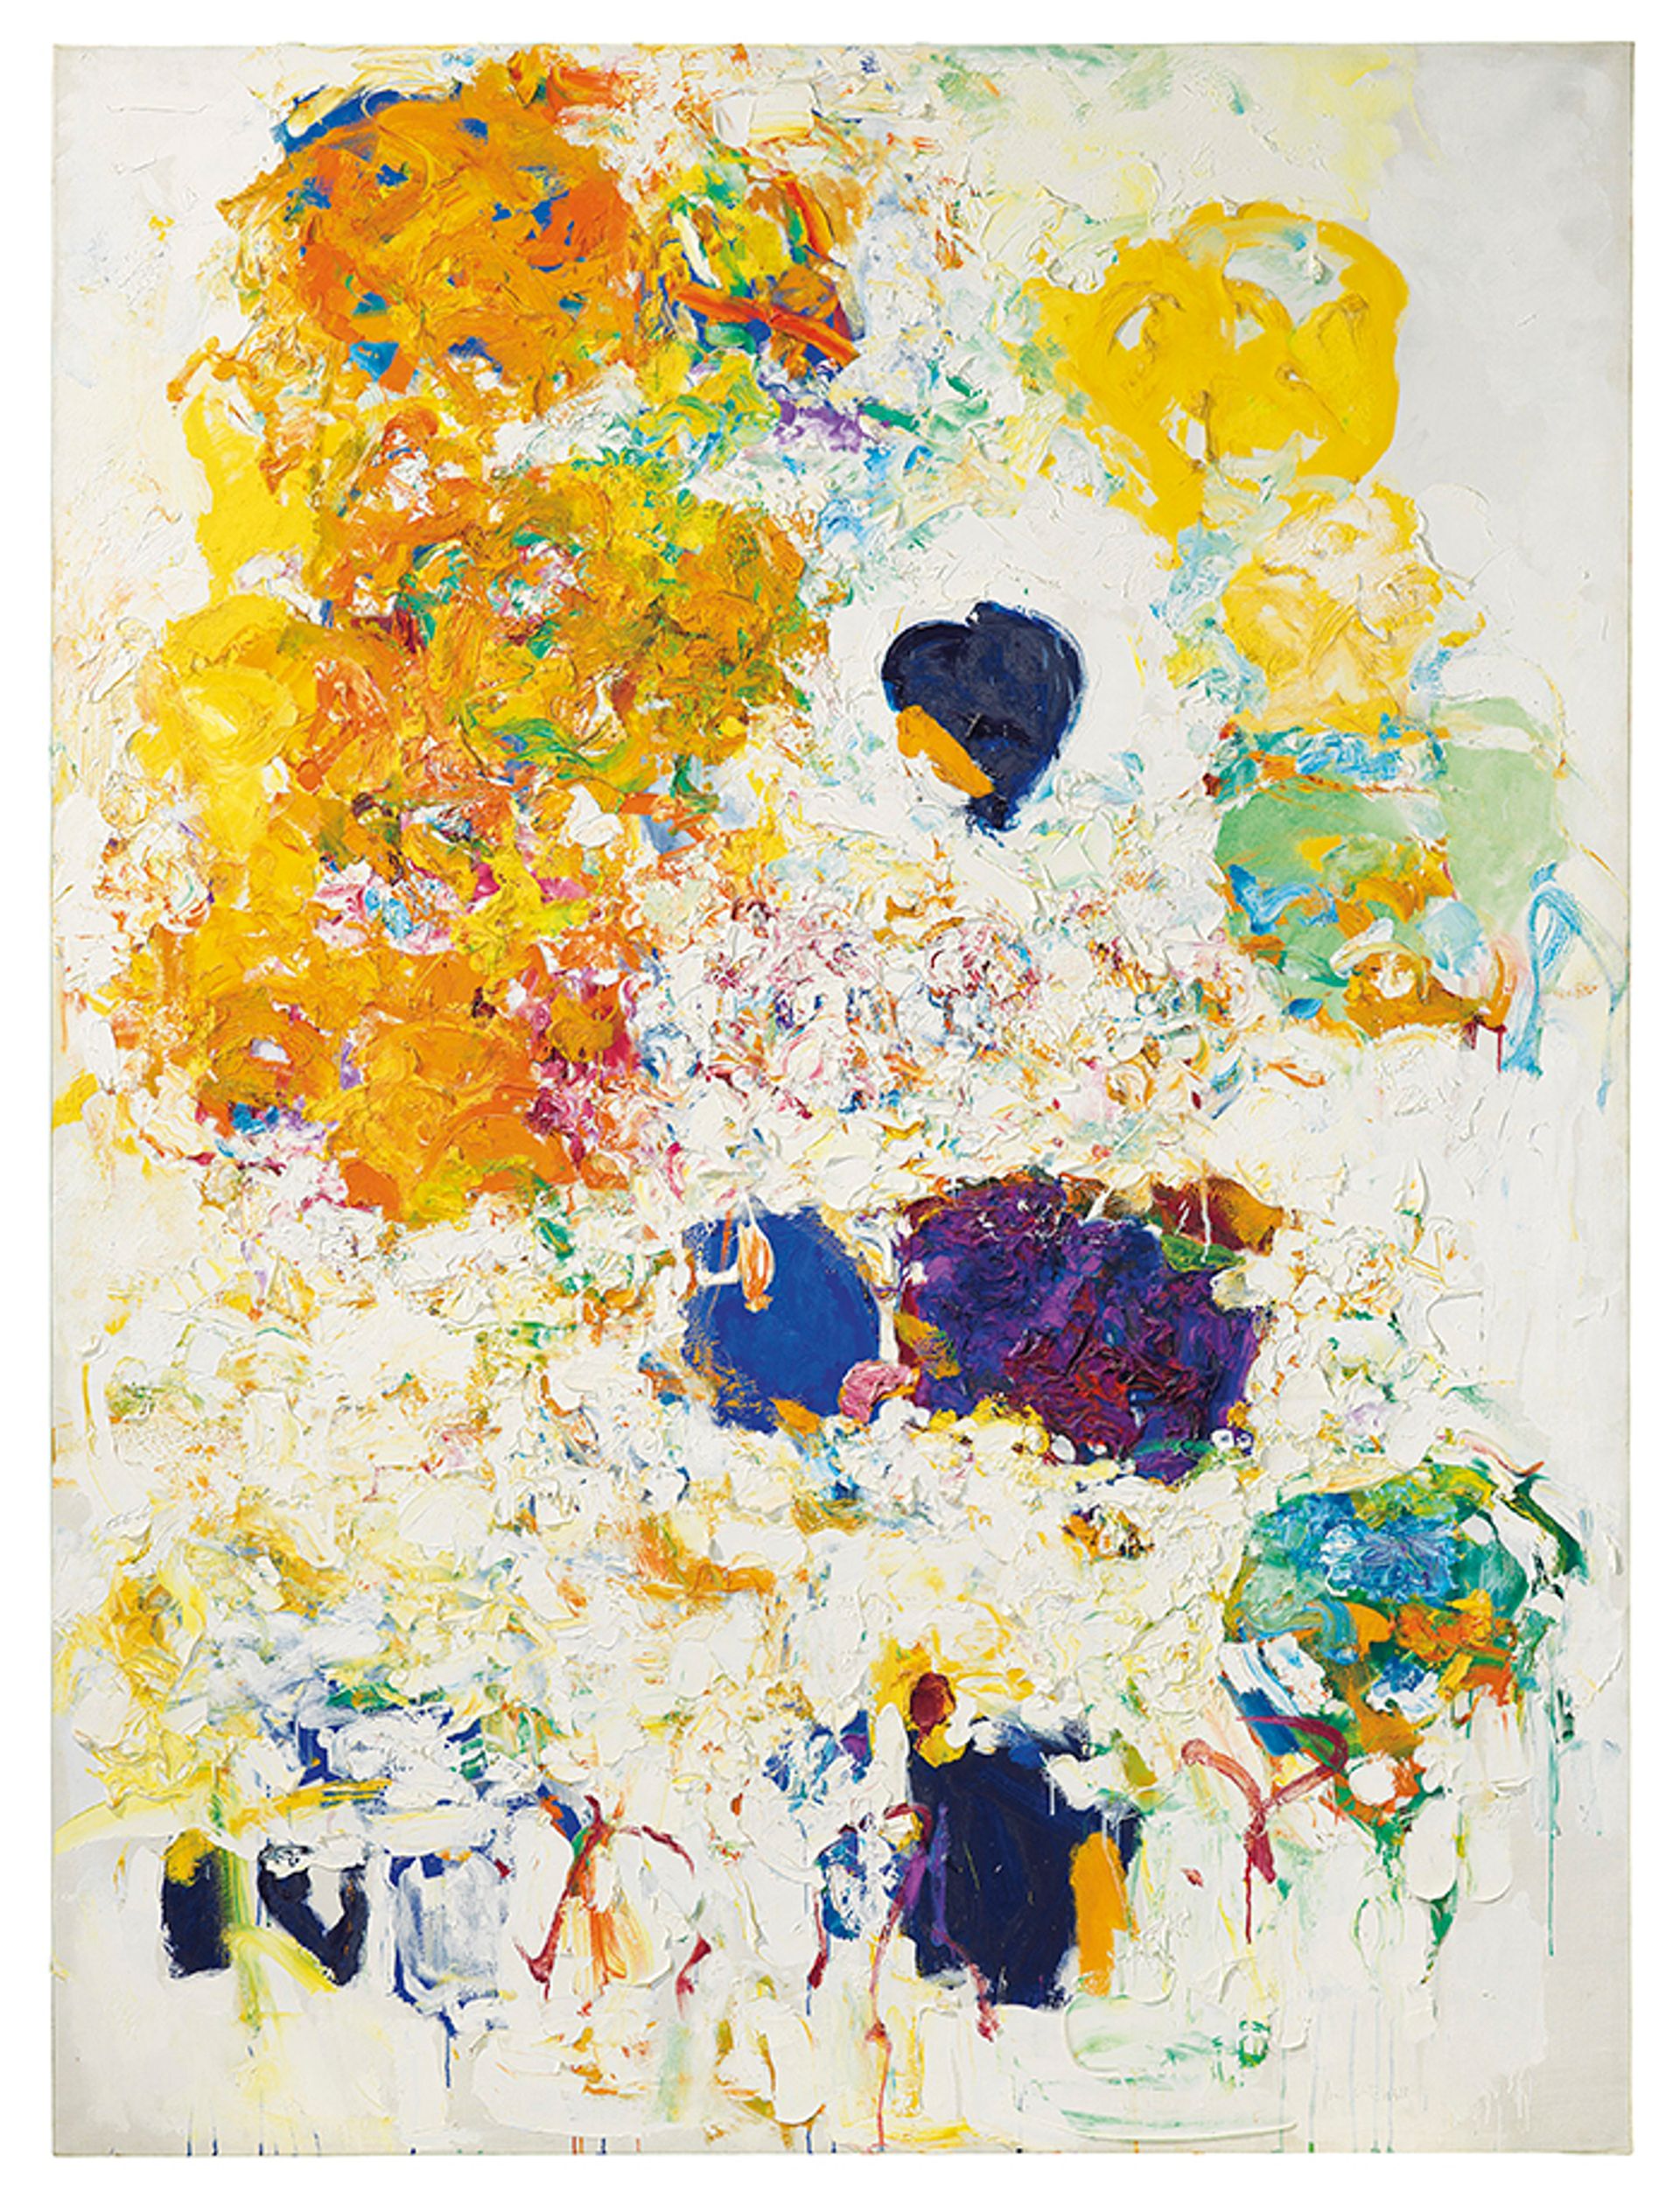 Joan Mitchell's Blueberry (1969), sold at Christie's for $16.6m Courtesy of Christie's Images LTD